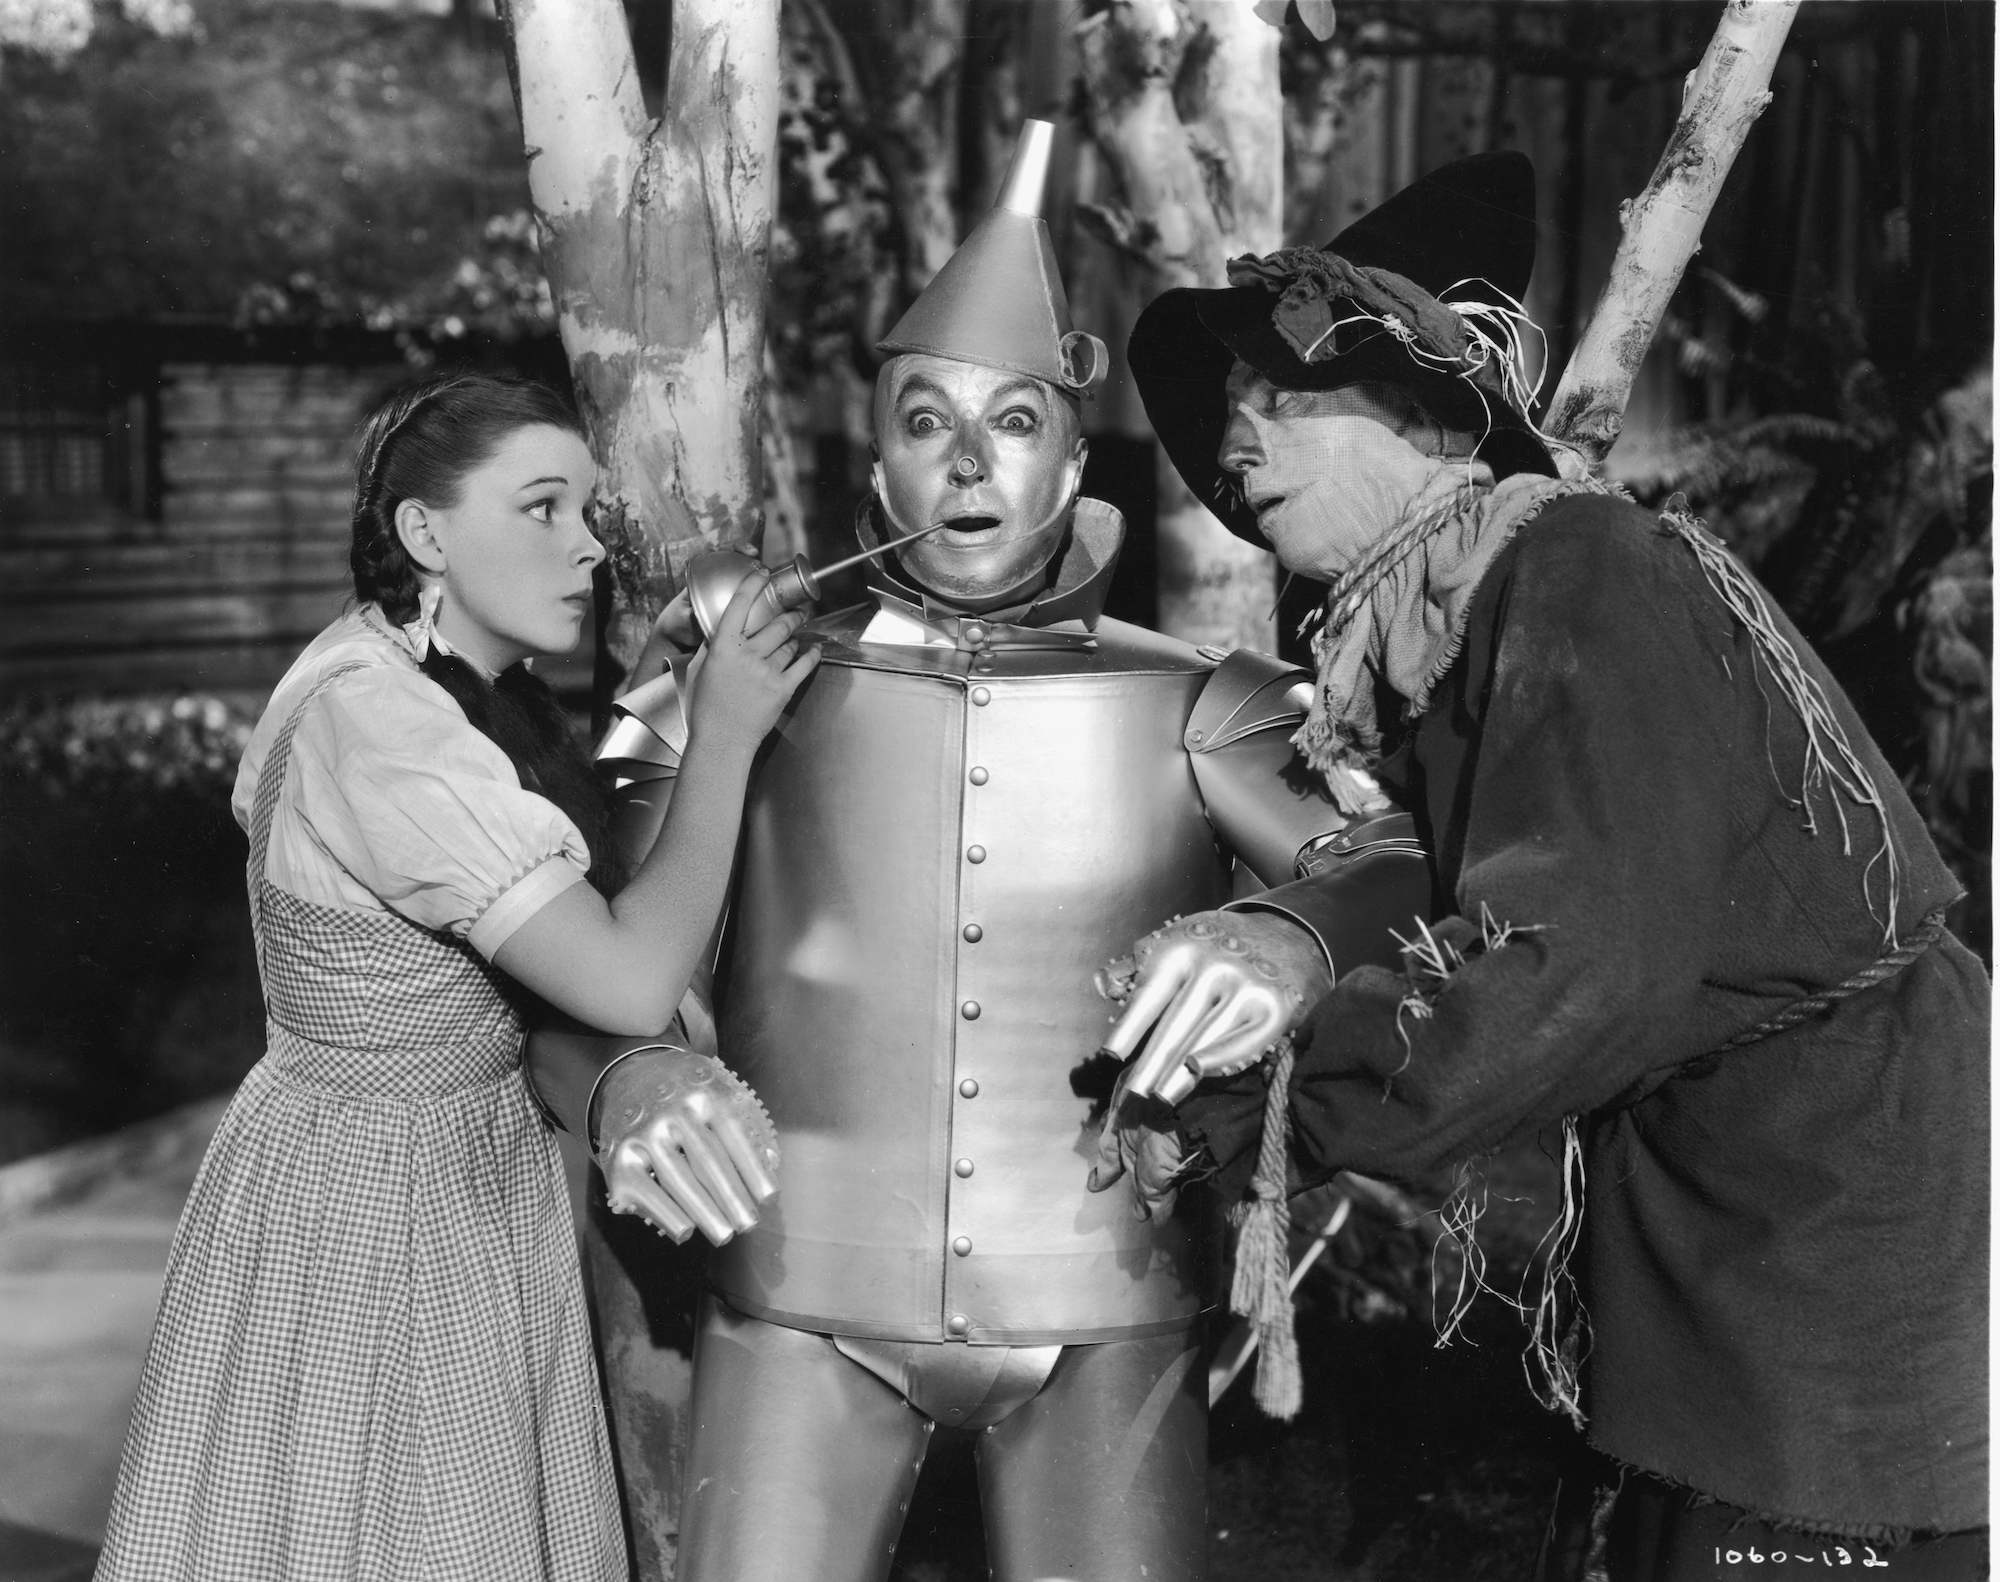 ‘Wizard of Oz’: The Tin Man Costume Poisoned the Original Actor While Filming ‘That Damn Movie’